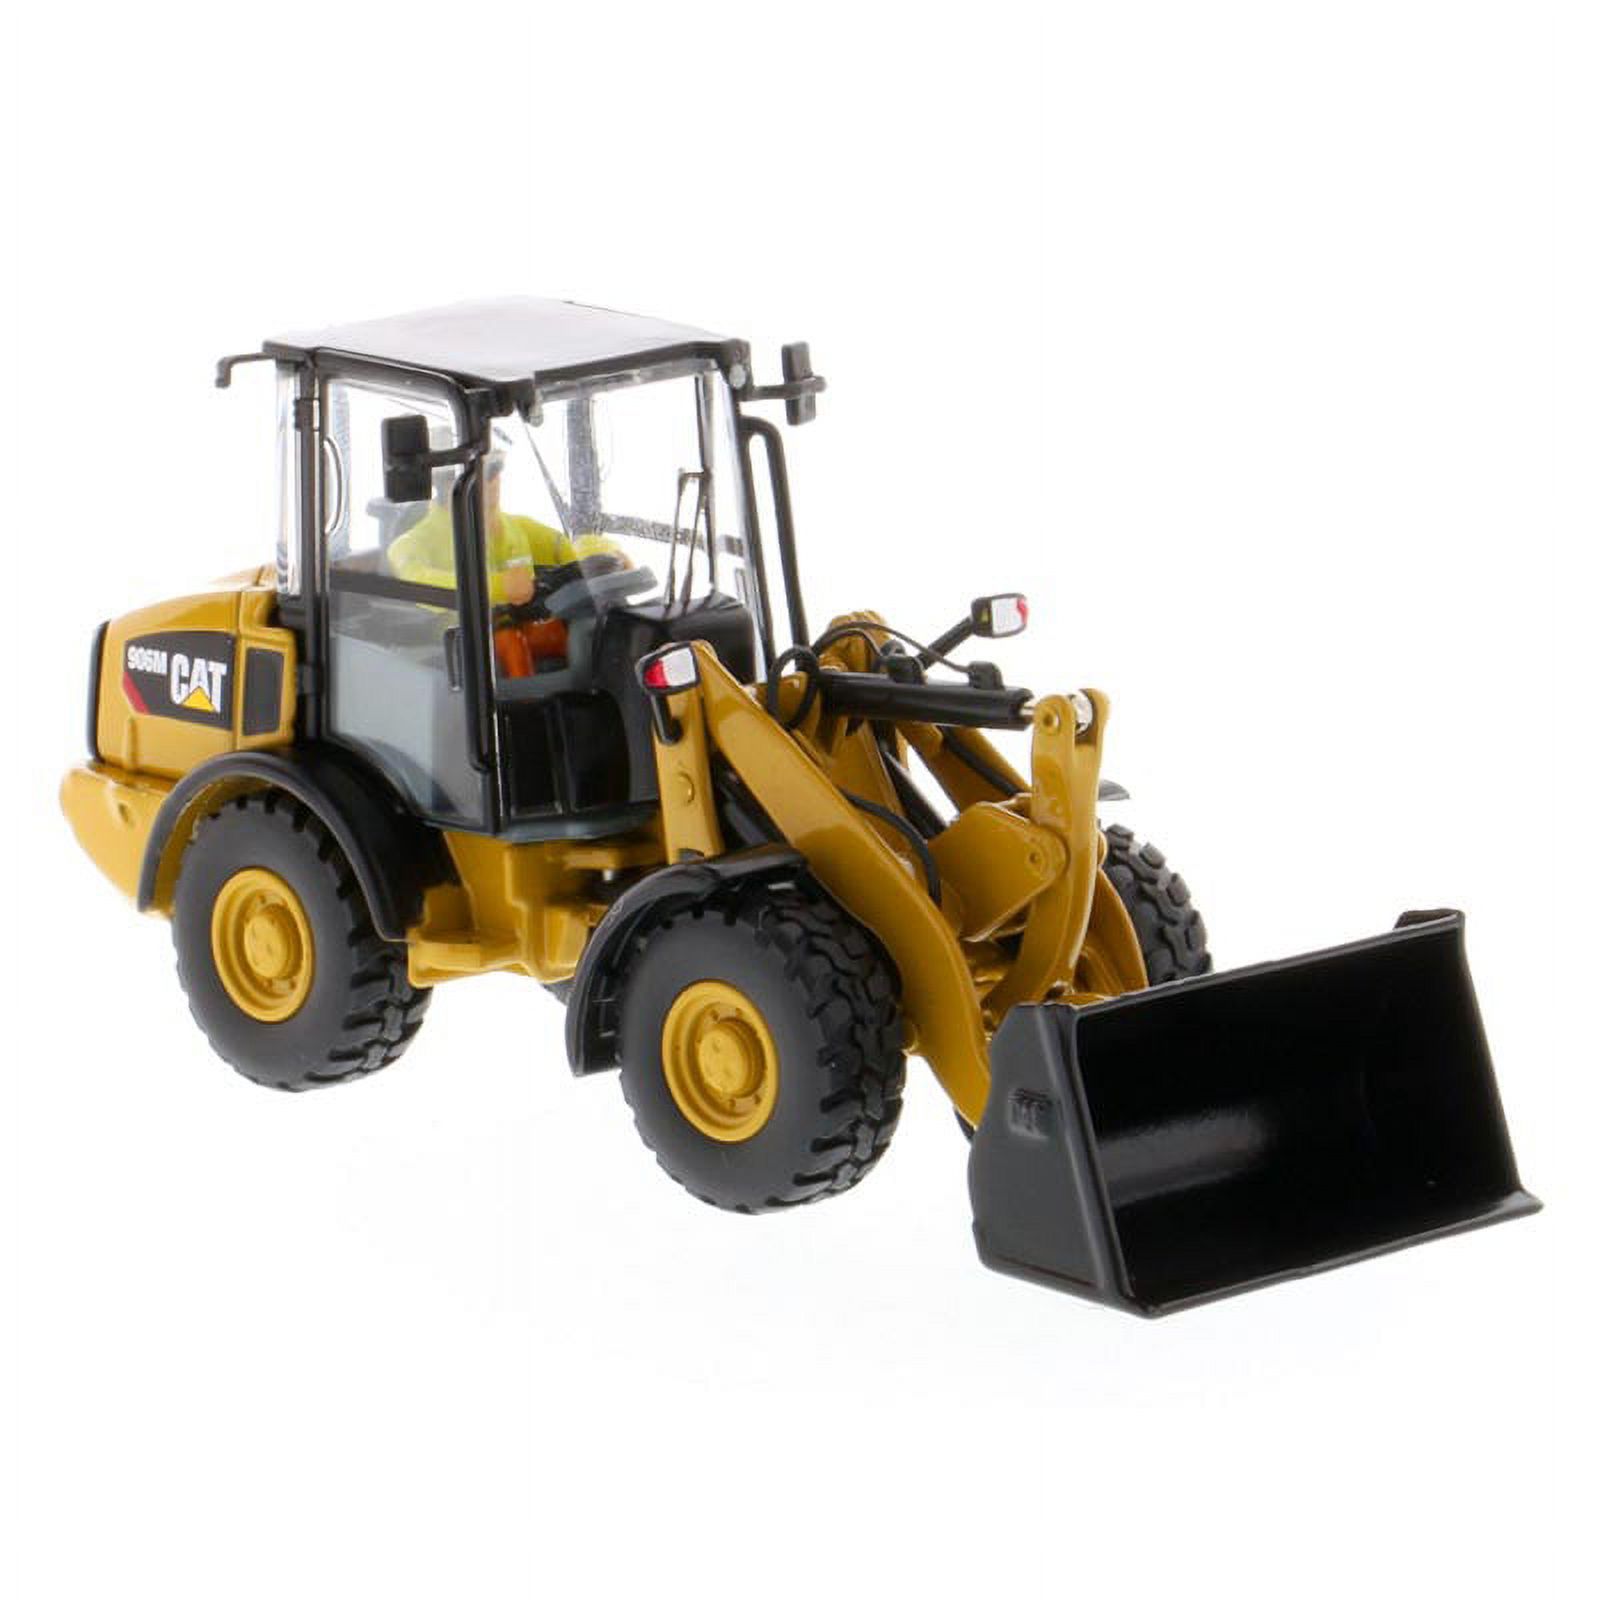 Diecast Masters 85557 1-50 CAT Caterpillar 906M Diecast Model Compact Wheel Loader with Operator - image 2 of 4